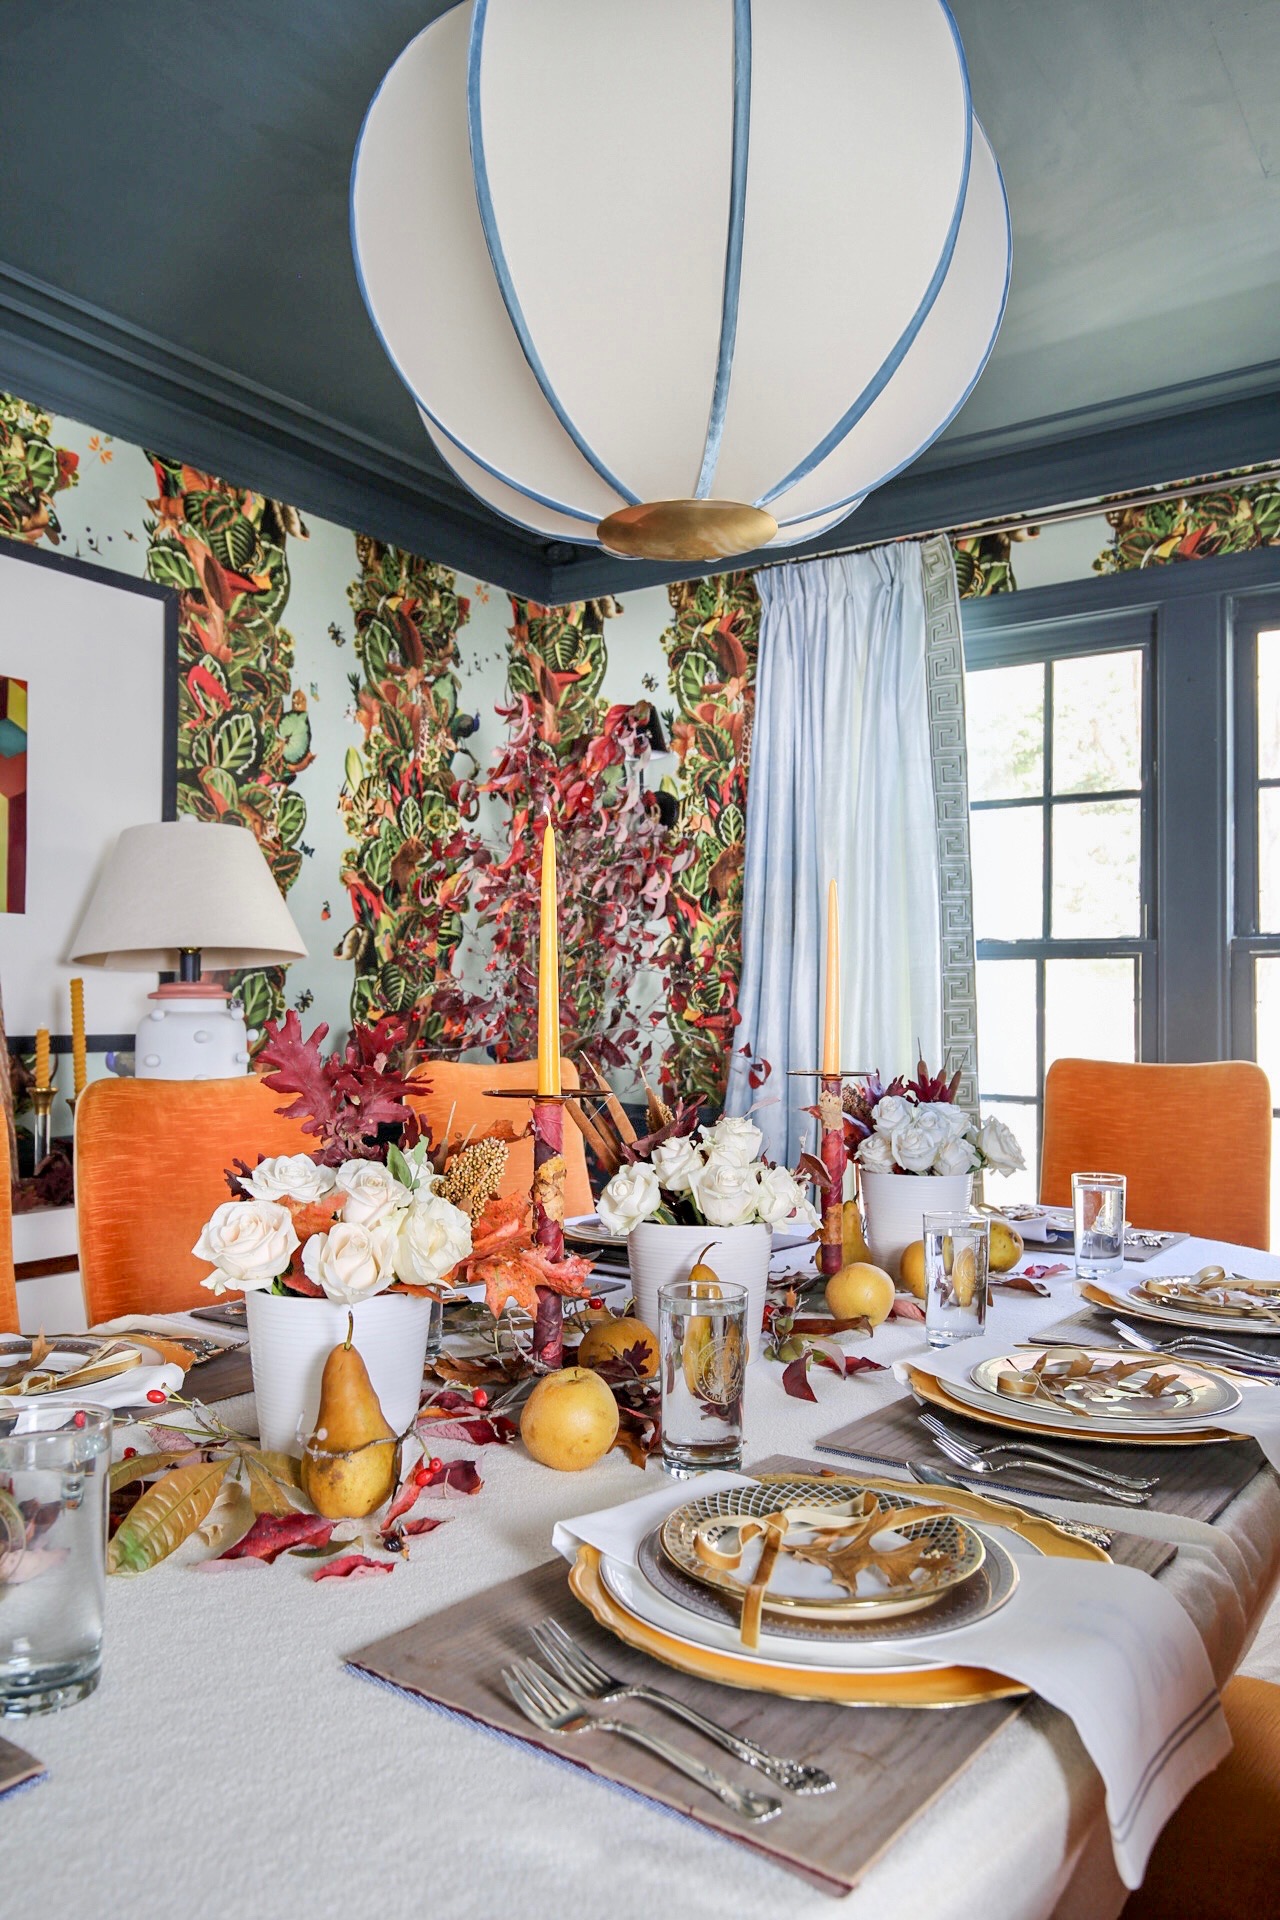 maximalist decor, maximalist dining room, fall dining room decor, fall tablescape, jupiter chandelier, orange chairs